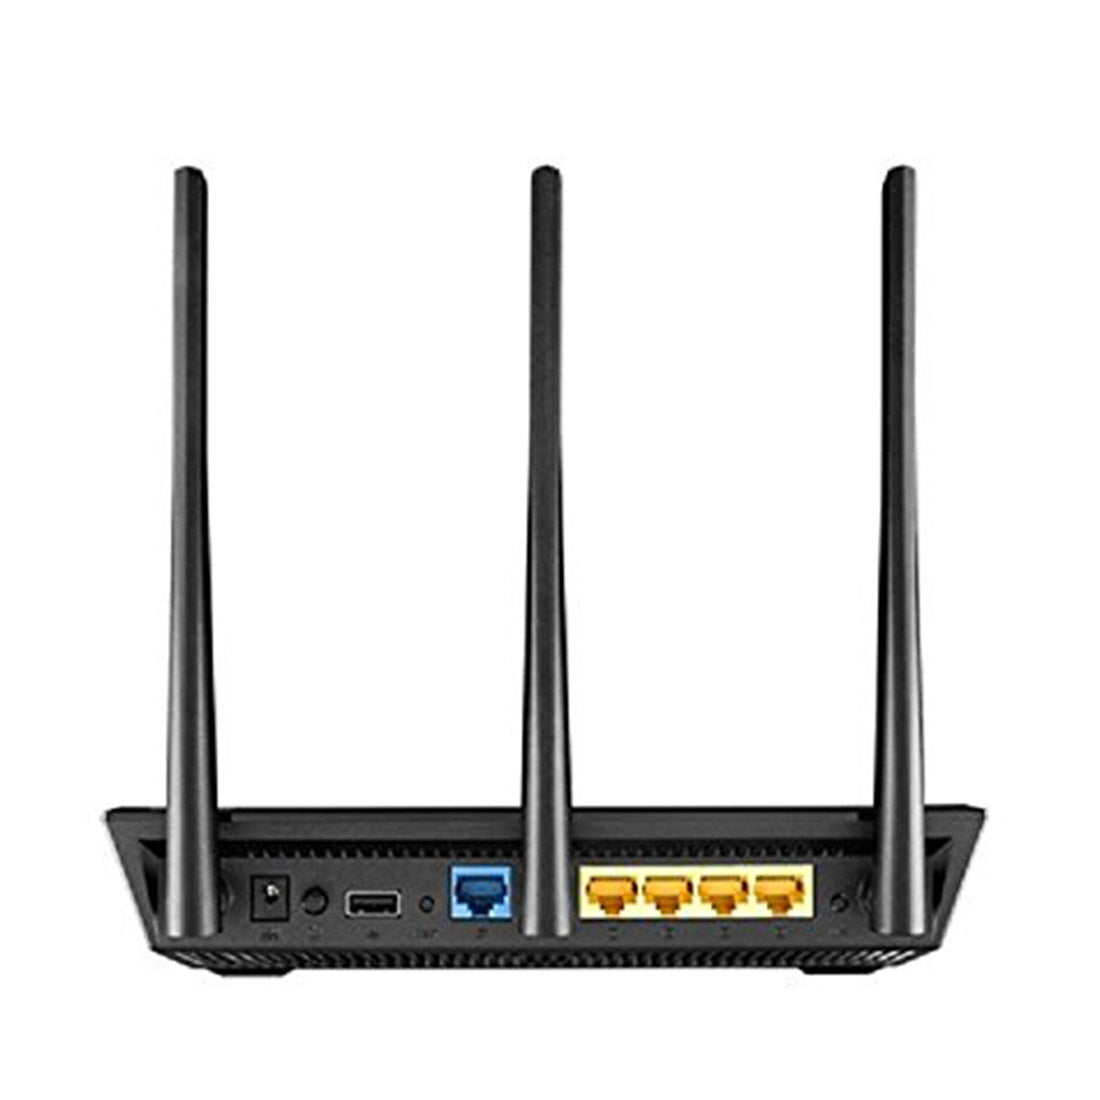 ASUS RT-AC66U B1 AC1750 Dual Band Gigabit WiFi Router with AiProtection Adaptive QoS and Parental Control